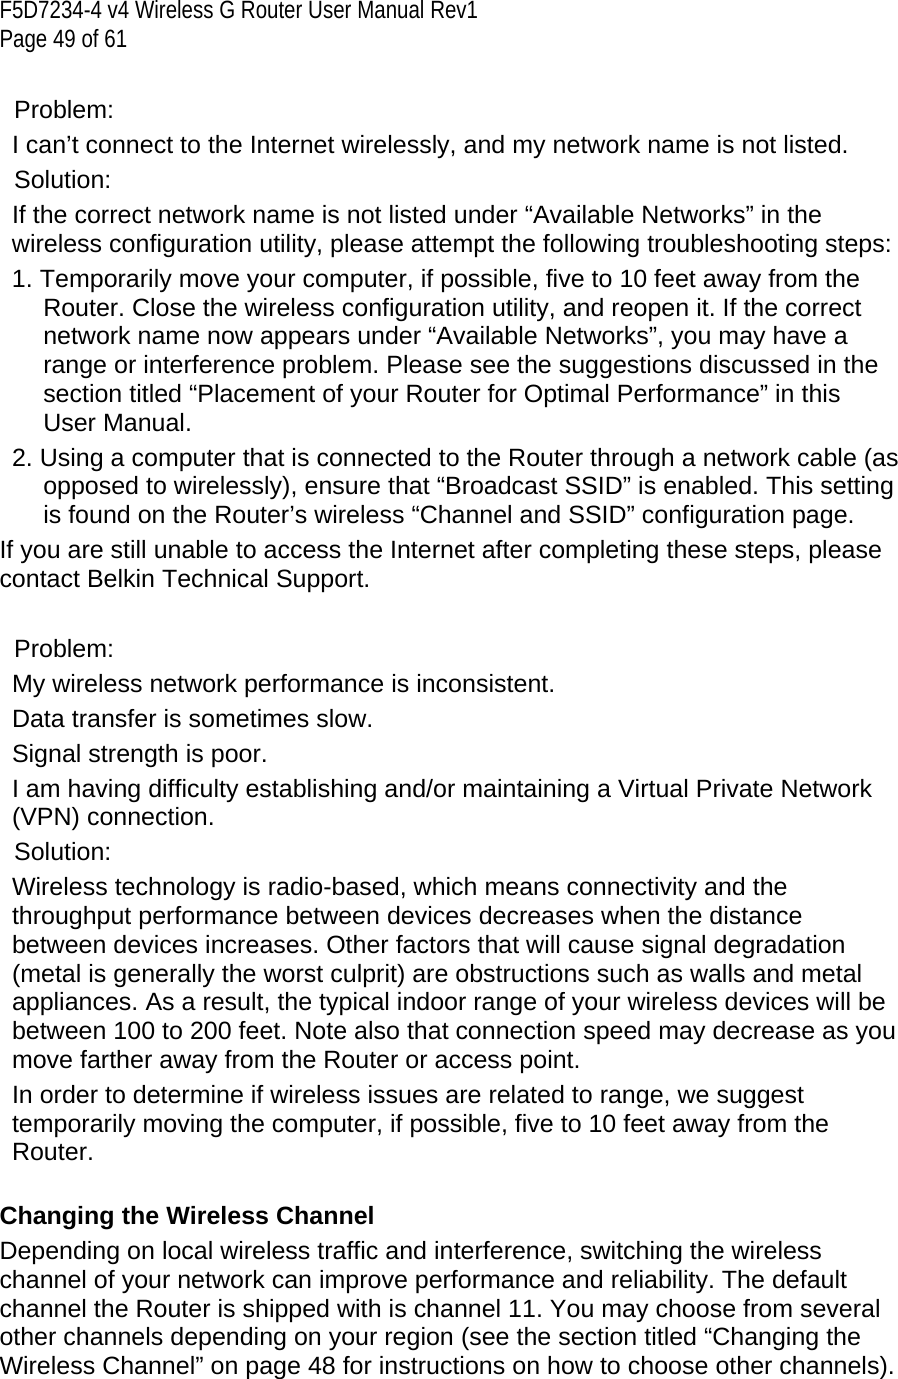 F5D7234-4 v4 Wireless G Router User Manual Rev1  Page 49 of 61   Problem: I can’t connect to the Internet wirelessly, and my network name is not listed. Solution: If the correct network name is not listed under “Available Networks” in the wireless configuration utility, please attempt the following troubleshooting steps:  1. Temporarily move your computer, if possible, five to 10 feet away from the Router. Close the wireless configuration utility, and reopen it. If the correct network name now appears under “Available Networks”, you may have a range or interference problem. Please see the suggestions discussed in the section titled “Placement of your Router for Optimal Performance” in this User Manual.  2. Using a computer that is connected to the Router through a network cable (as opposed to wirelessly), ensure that “Broadcast SSID” is enabled. This setting is found on the Router’s wireless “Channel and SSID” configuration page.  If you are still unable to access the Internet after completing these steps, please contact Belkin Technical Support.  Problem:  My wireless network performance is inconsistent. Data transfer is sometimes slow. Signal strength is poor. I am having difficulty establishing and/or maintaining a Virtual Private Network (VPN) connection. Solution: Wireless technology is radio-based, which means connectivity and the throughput performance between devices decreases when the distance between devices increases. Other factors that will cause signal degradation (metal is generally the worst culprit) are obstructions such as walls and metal appliances. As a result, the typical indoor range of your wireless devices will be between 100 to 200 feet. Note also that connection speed may decrease as you move farther away from the Router or access point.  In order to determine if wireless issues are related to range, we suggest temporarily moving the computer, if possible, five to 10 feet away from the Router.   Changing the Wireless Channel Depending on local wireless traffic and interference, switching the wireless channel of your network can improve performance and reliability. The default channel the Router is shipped with is channel 11. You may choose from several other channels depending on your region (see the section titled “Changing the Wireless Channel” on page 48 for instructions on how to choose other channels).   